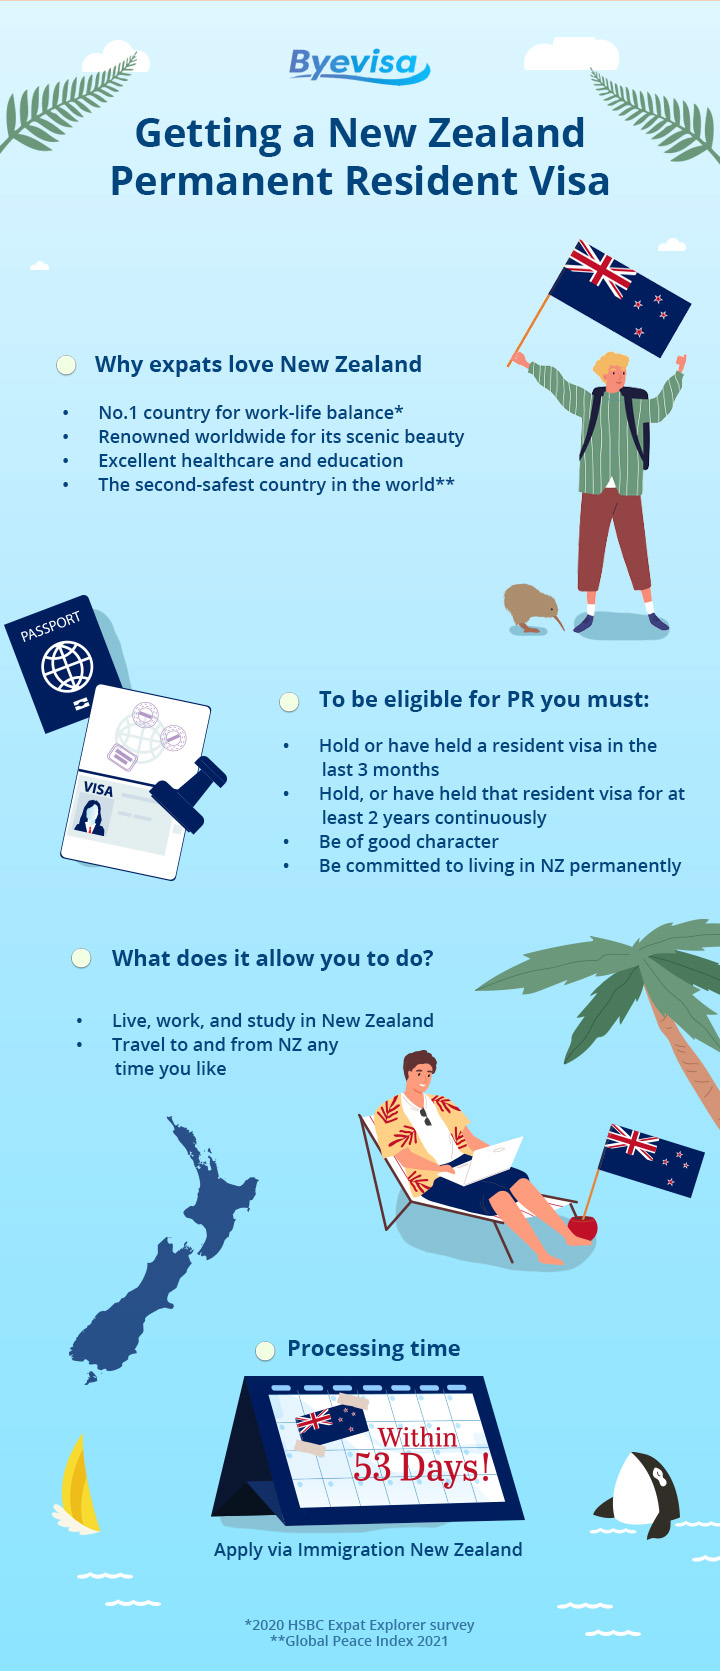 Is It Easier For Rich People To Become Permanent Residents Of New Zealand Byevisa 4347